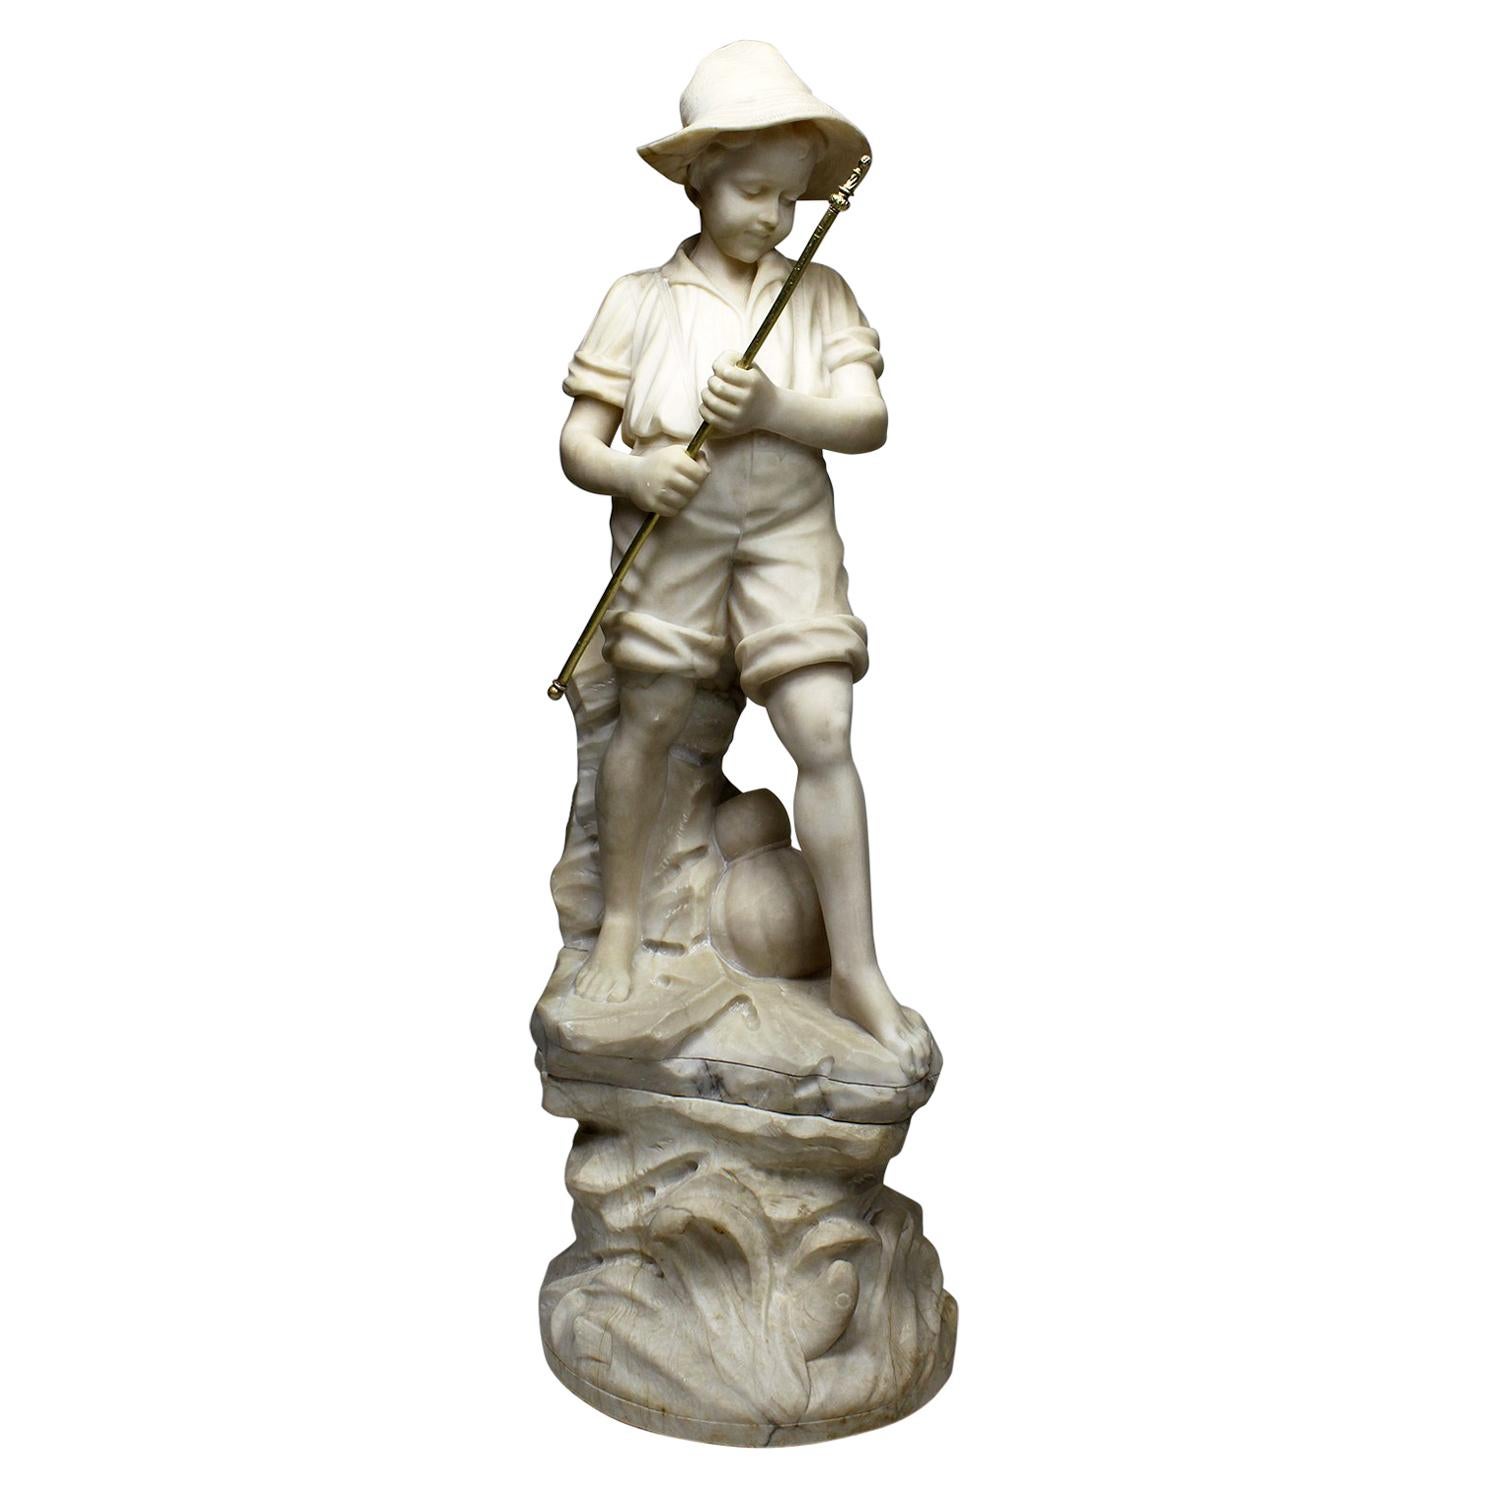 Charming Italian 19th-20th Century Carved Alabaster Figure of a Fisher Boy For Sale